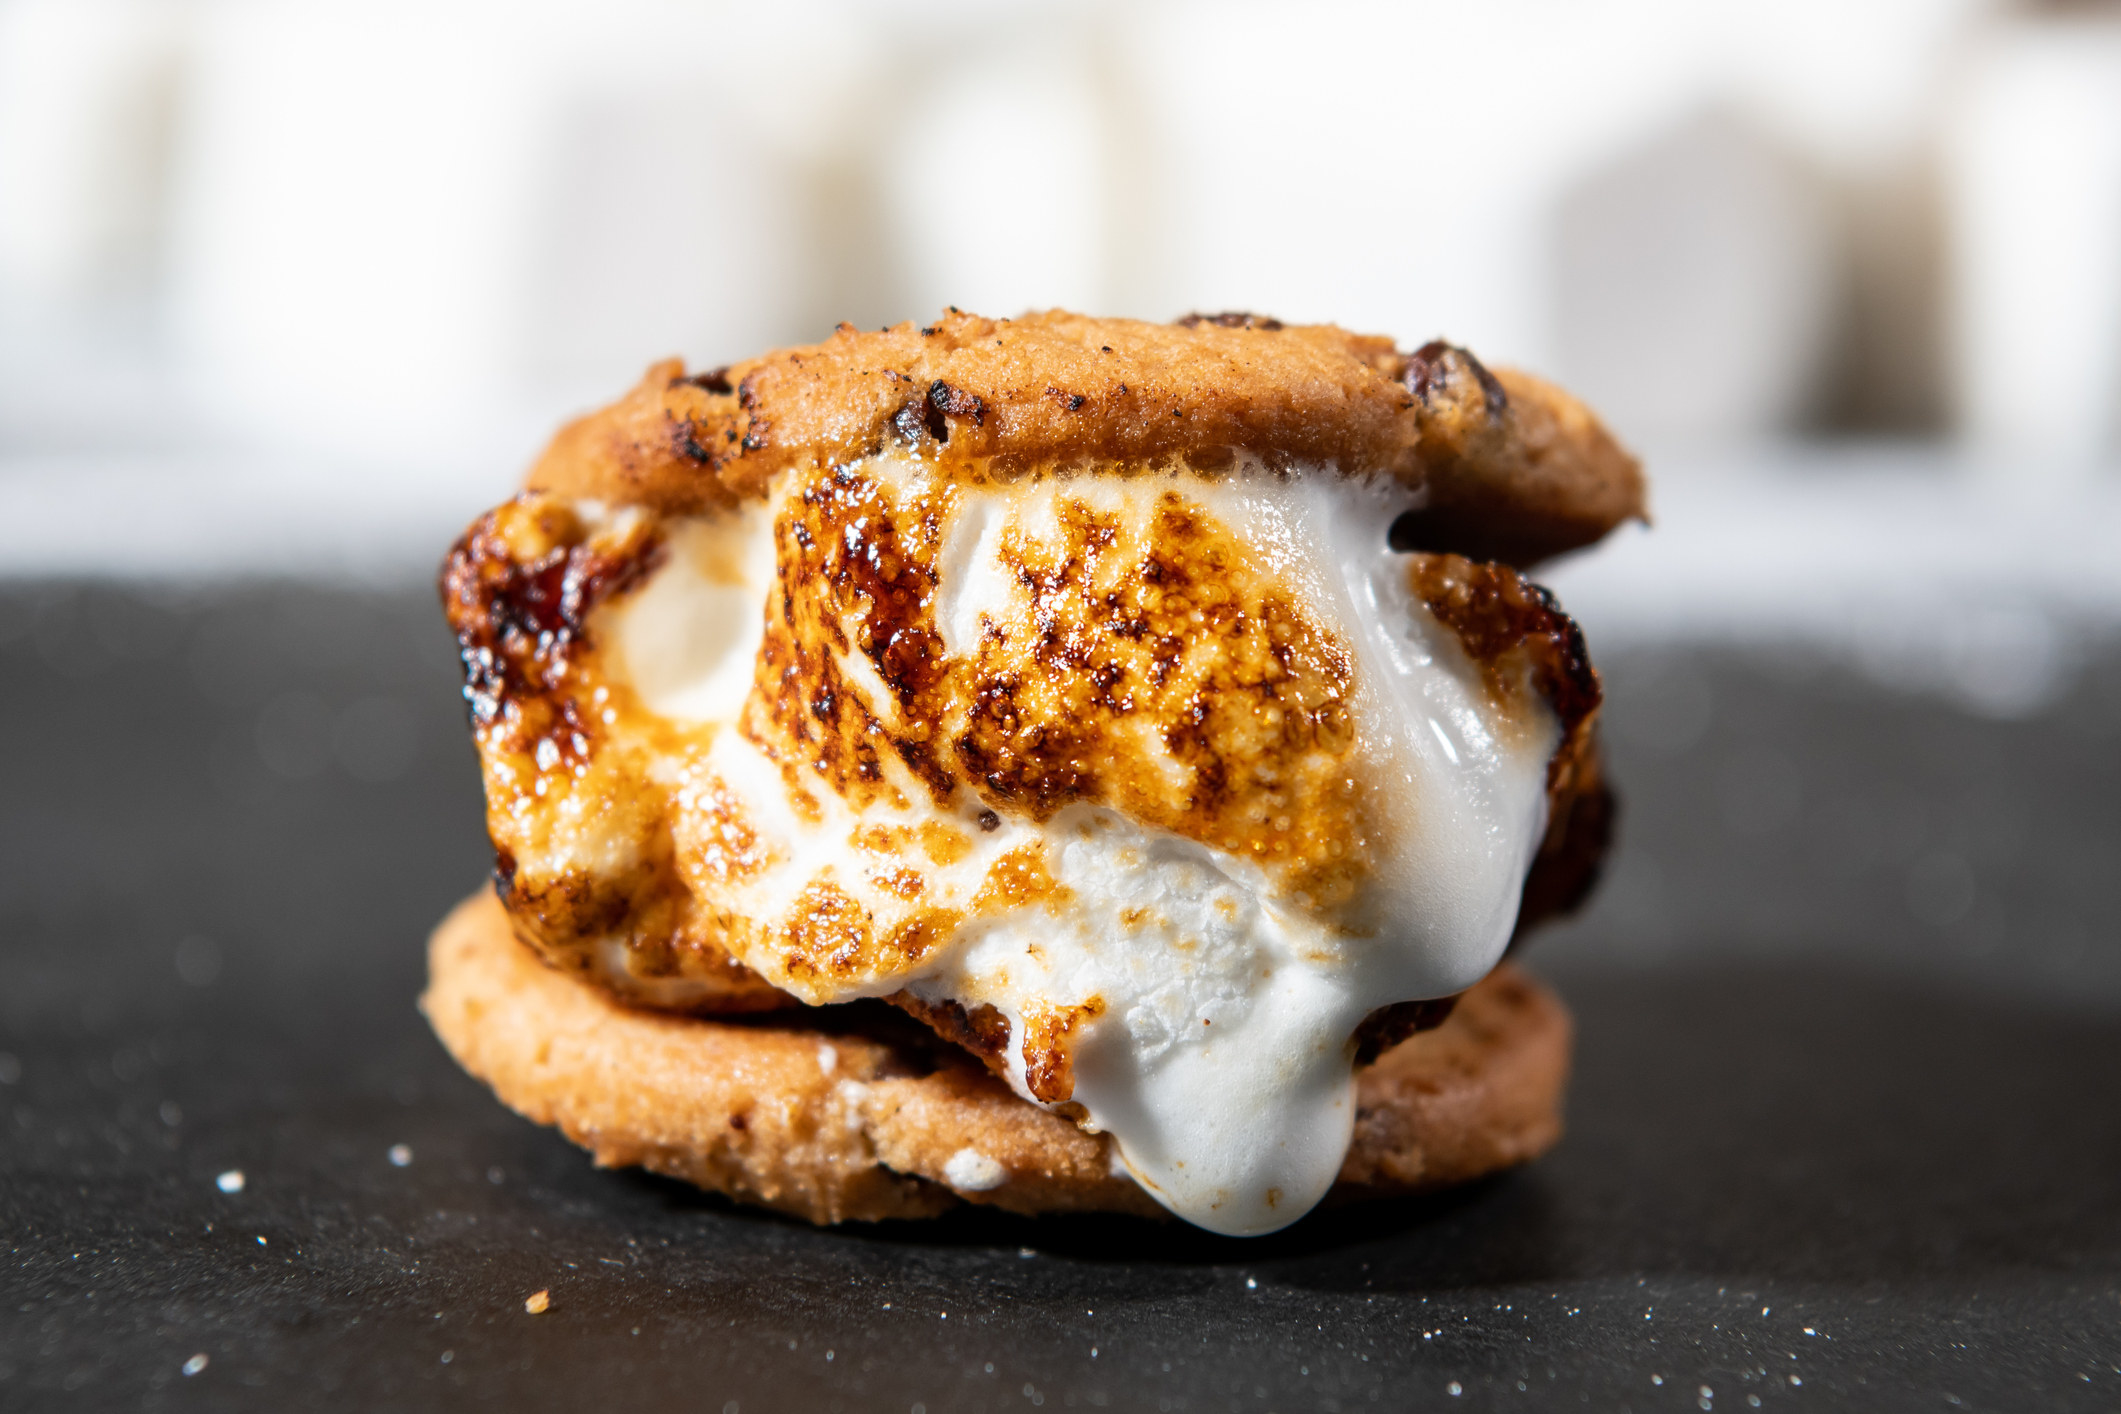 A s&#x27;more made with marshmallow, chocolate, and two chocolate chip cookie.